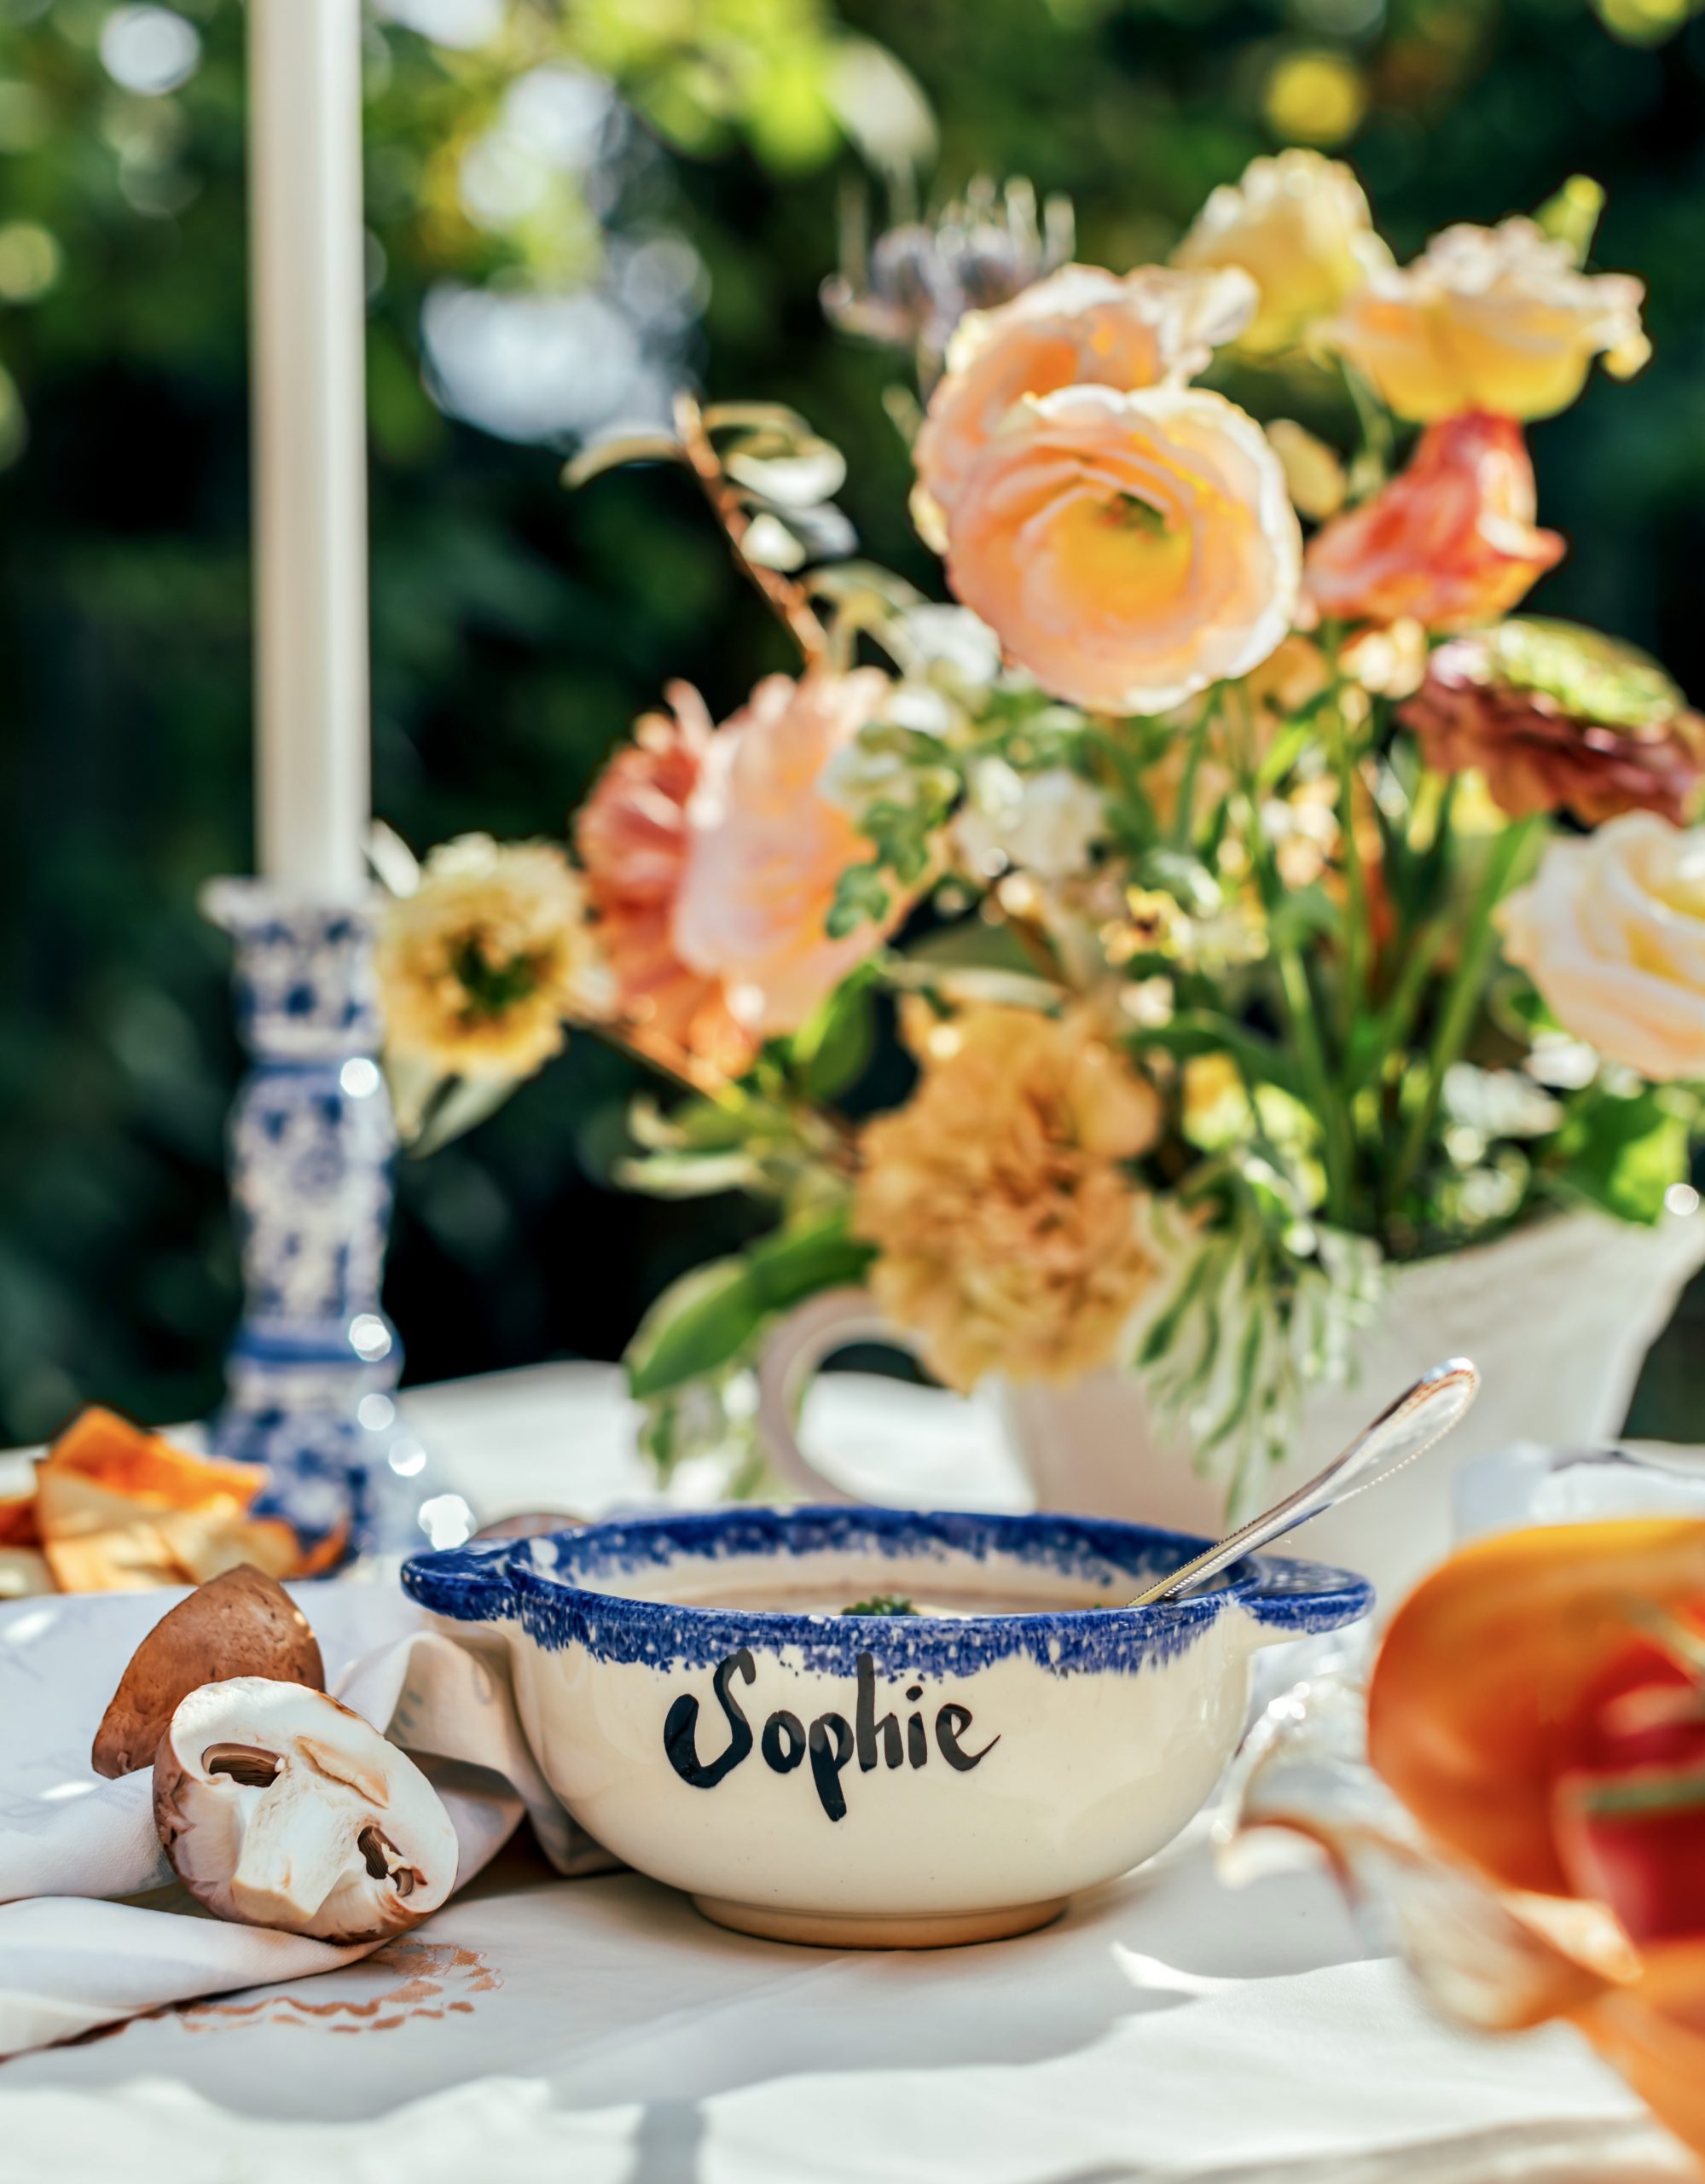 A white bowl with a blue rim design lays in the center of a table surrounded by various ingredients and centerpieces. The text on the blow reads "Sophie"